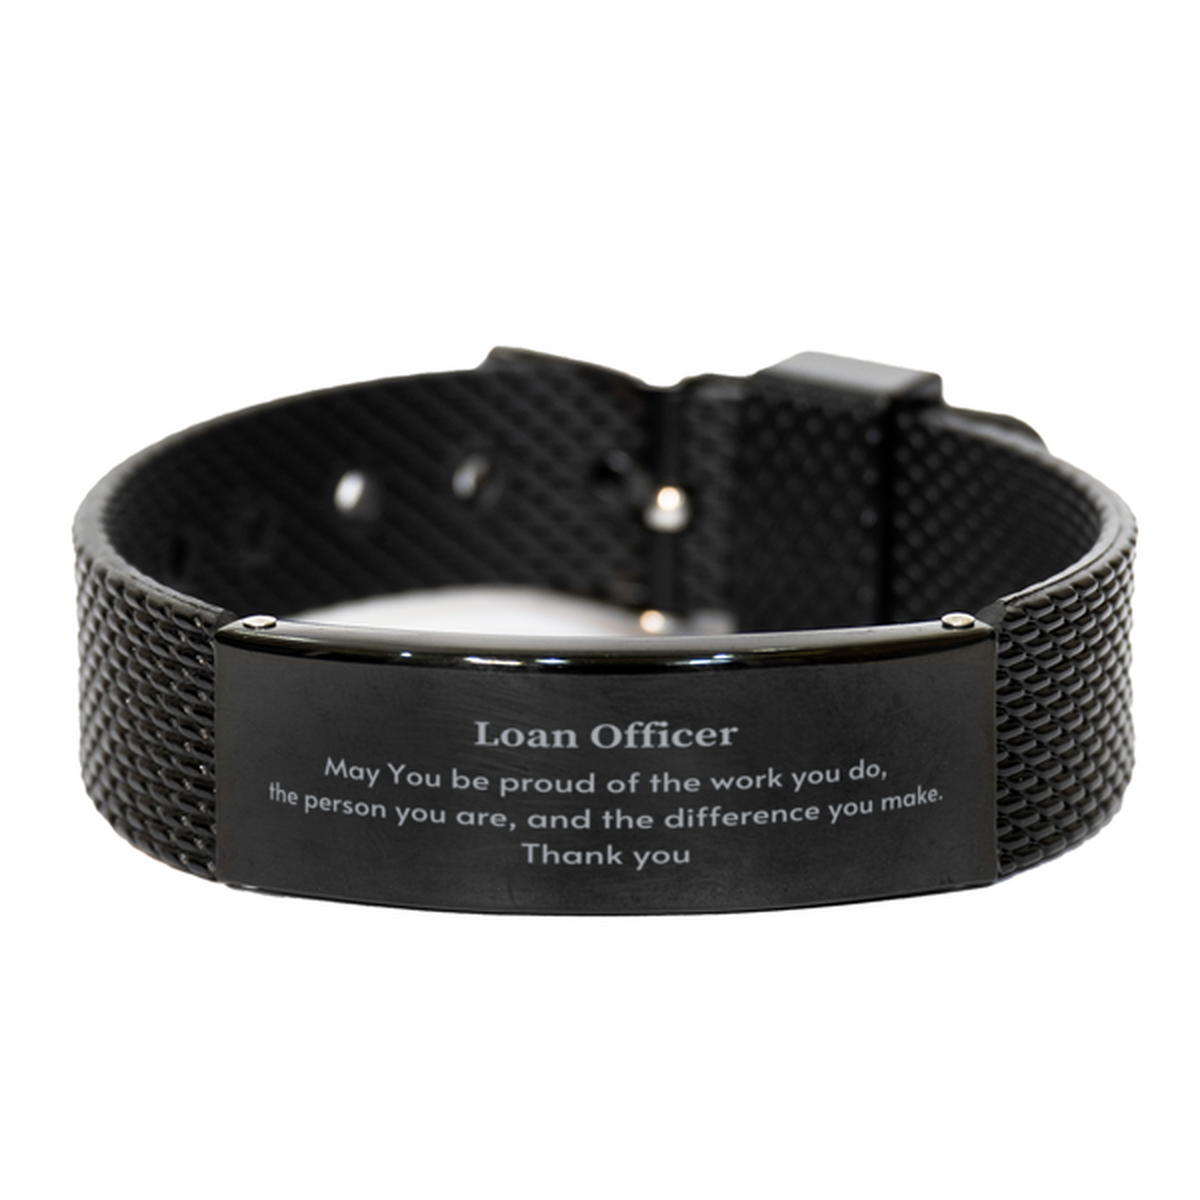 Heartwarming Black Shark Mesh Bracelet Retirement Coworkers Gifts for Loan Officer, Loan Officer May You be proud of the work you do, the person you are Gifts for Boss Men Women Friends